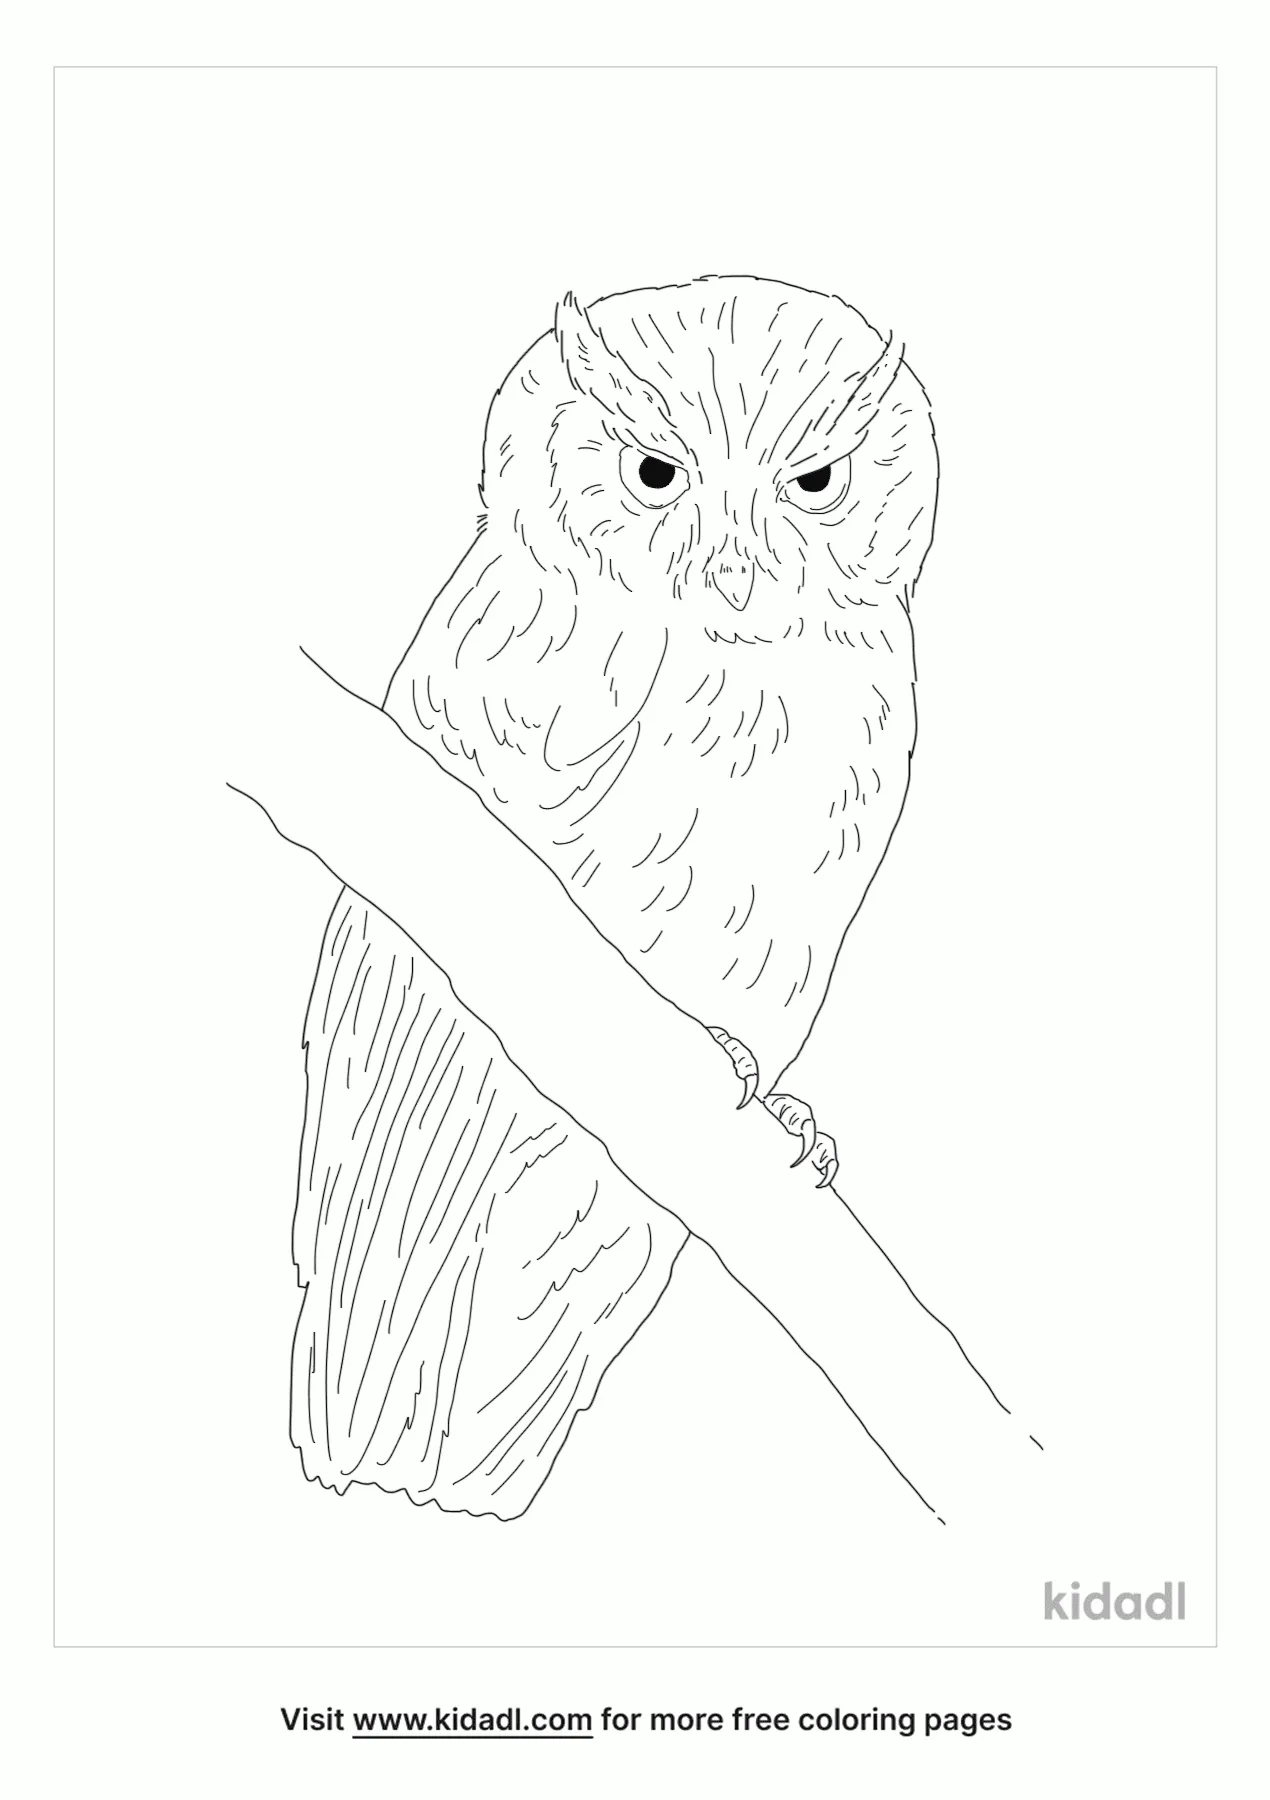 screech owl coloring pages